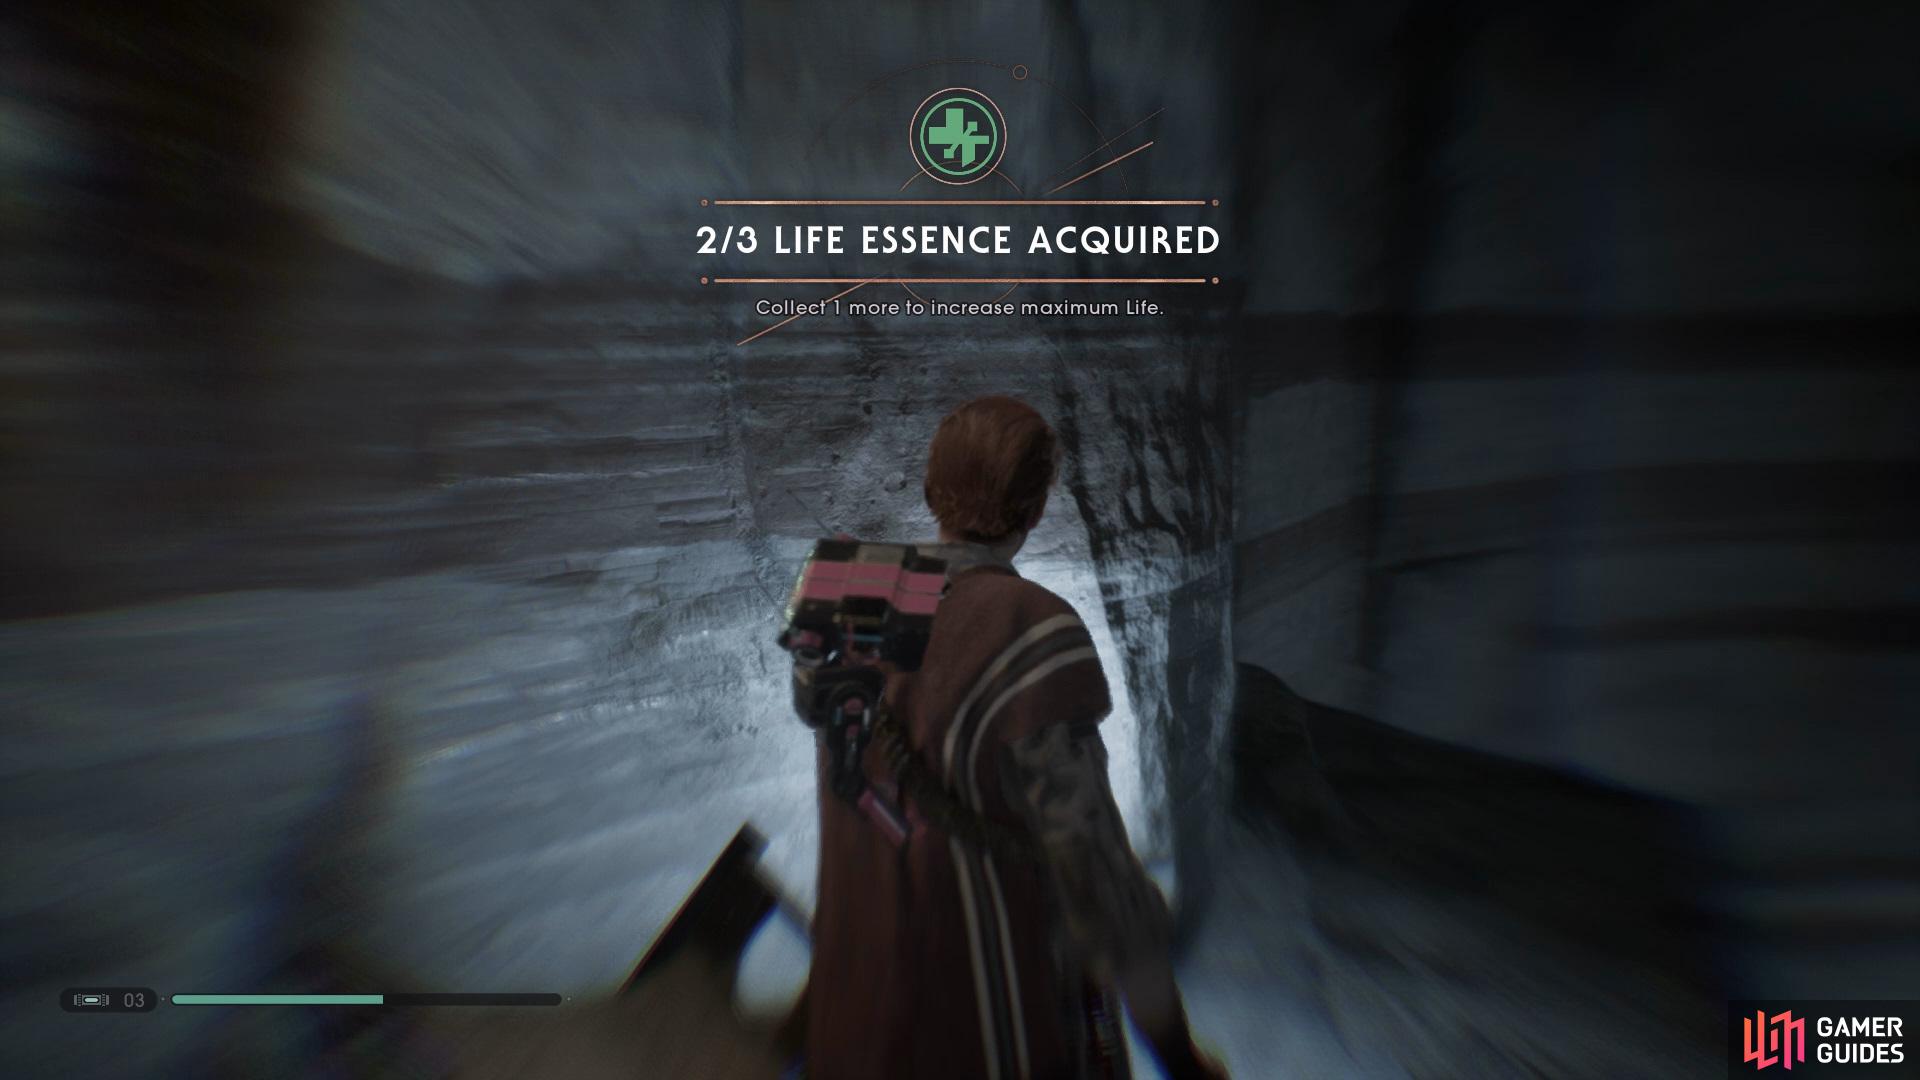 Head to the Subterranean Refuge to find the first Life Essence. 